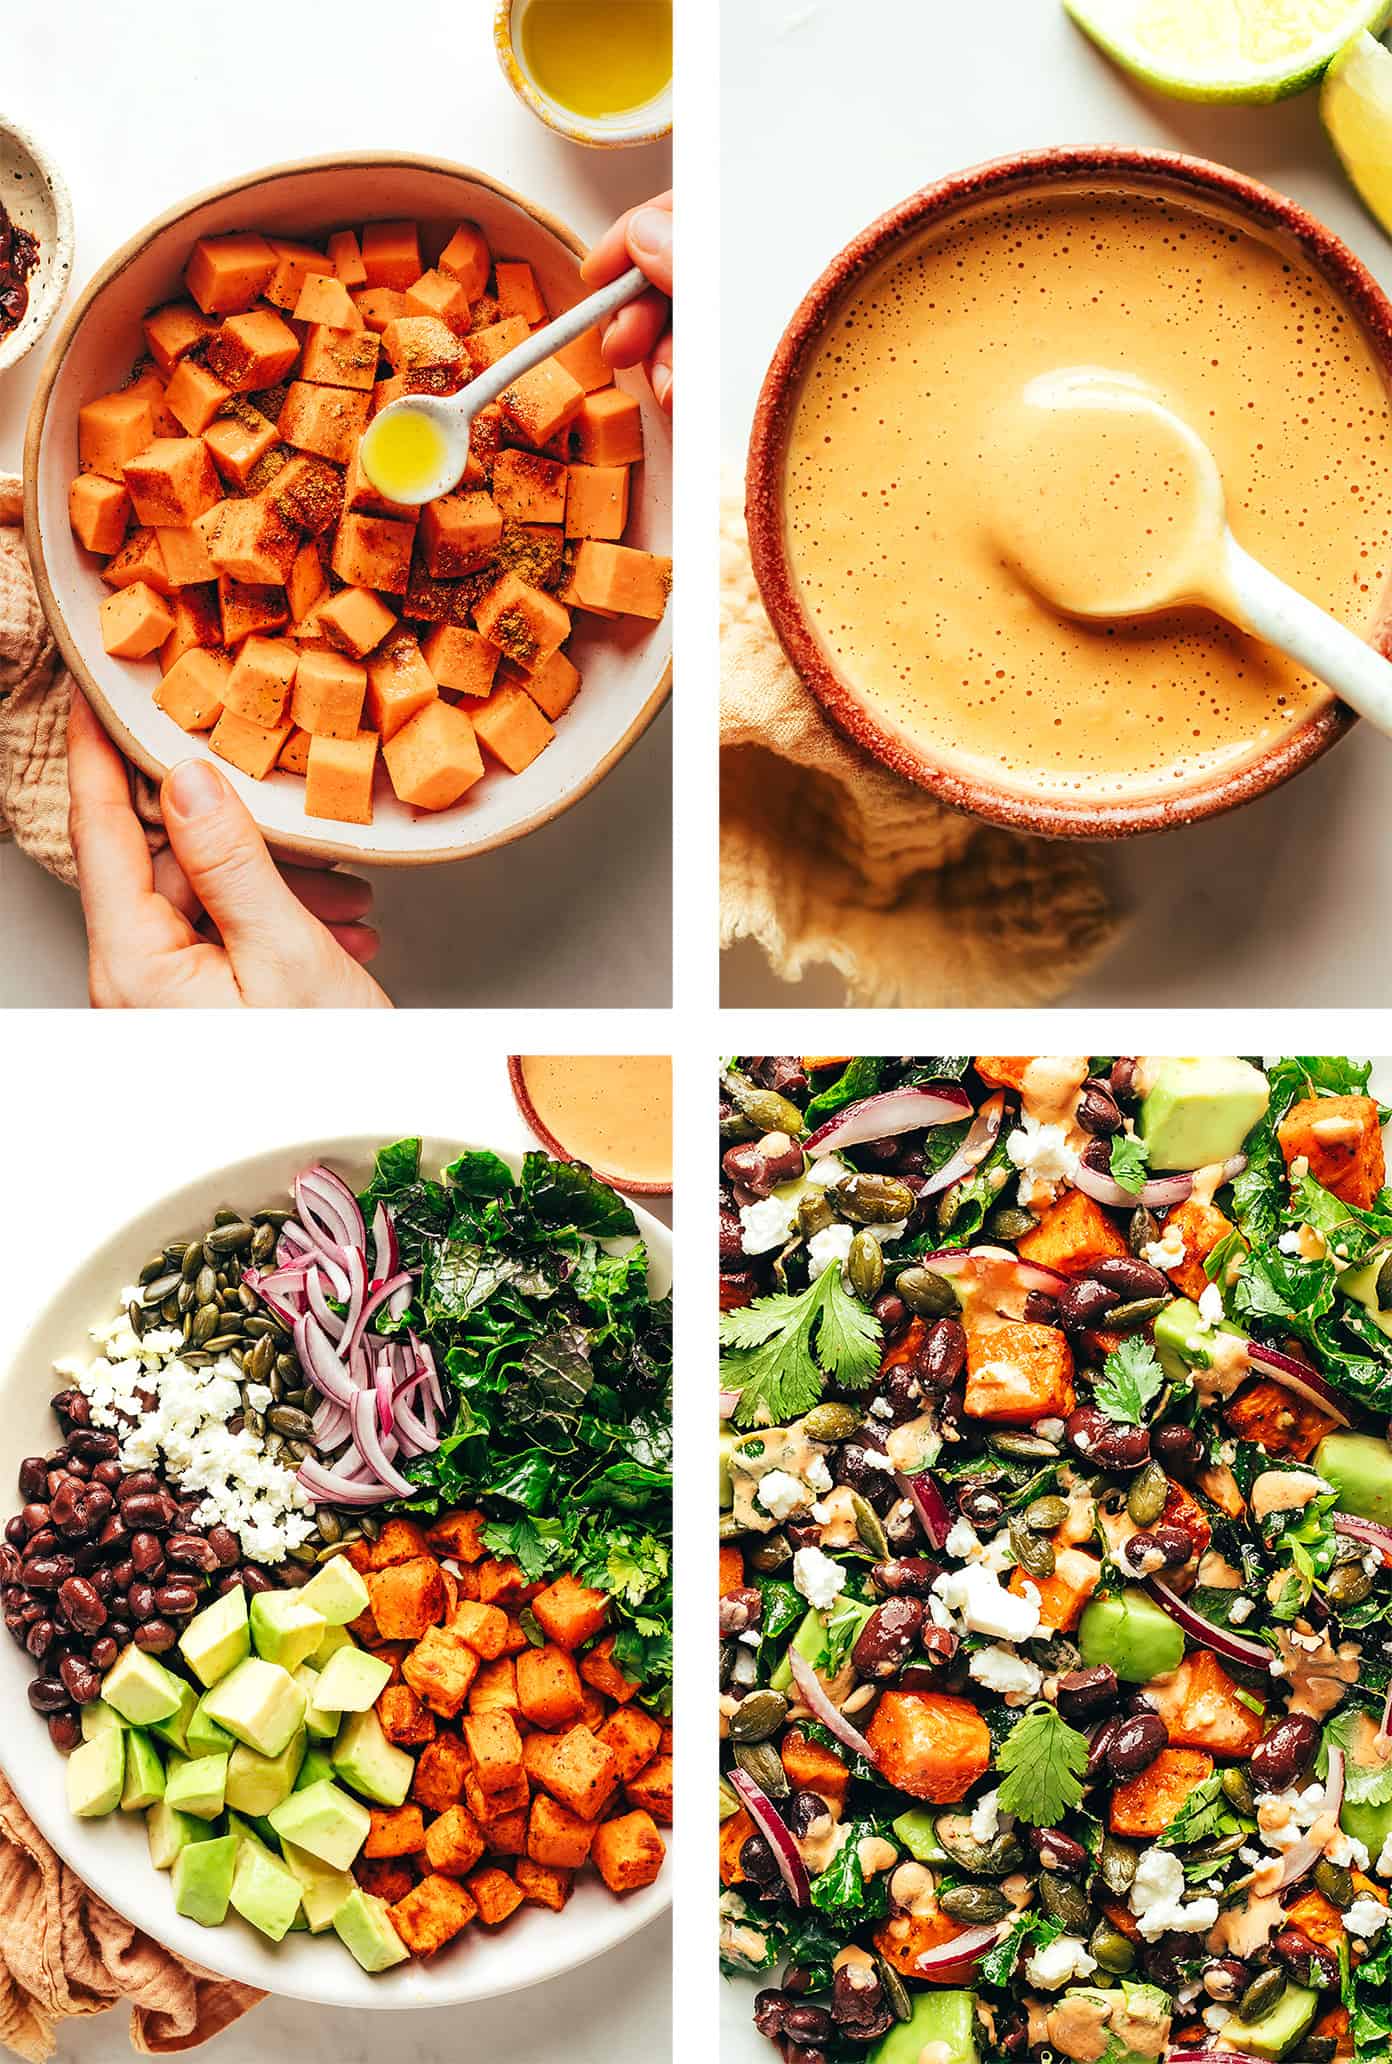 Step by step photos showing how to make sweet potato avocado kale salad with chipotle tahini dressing